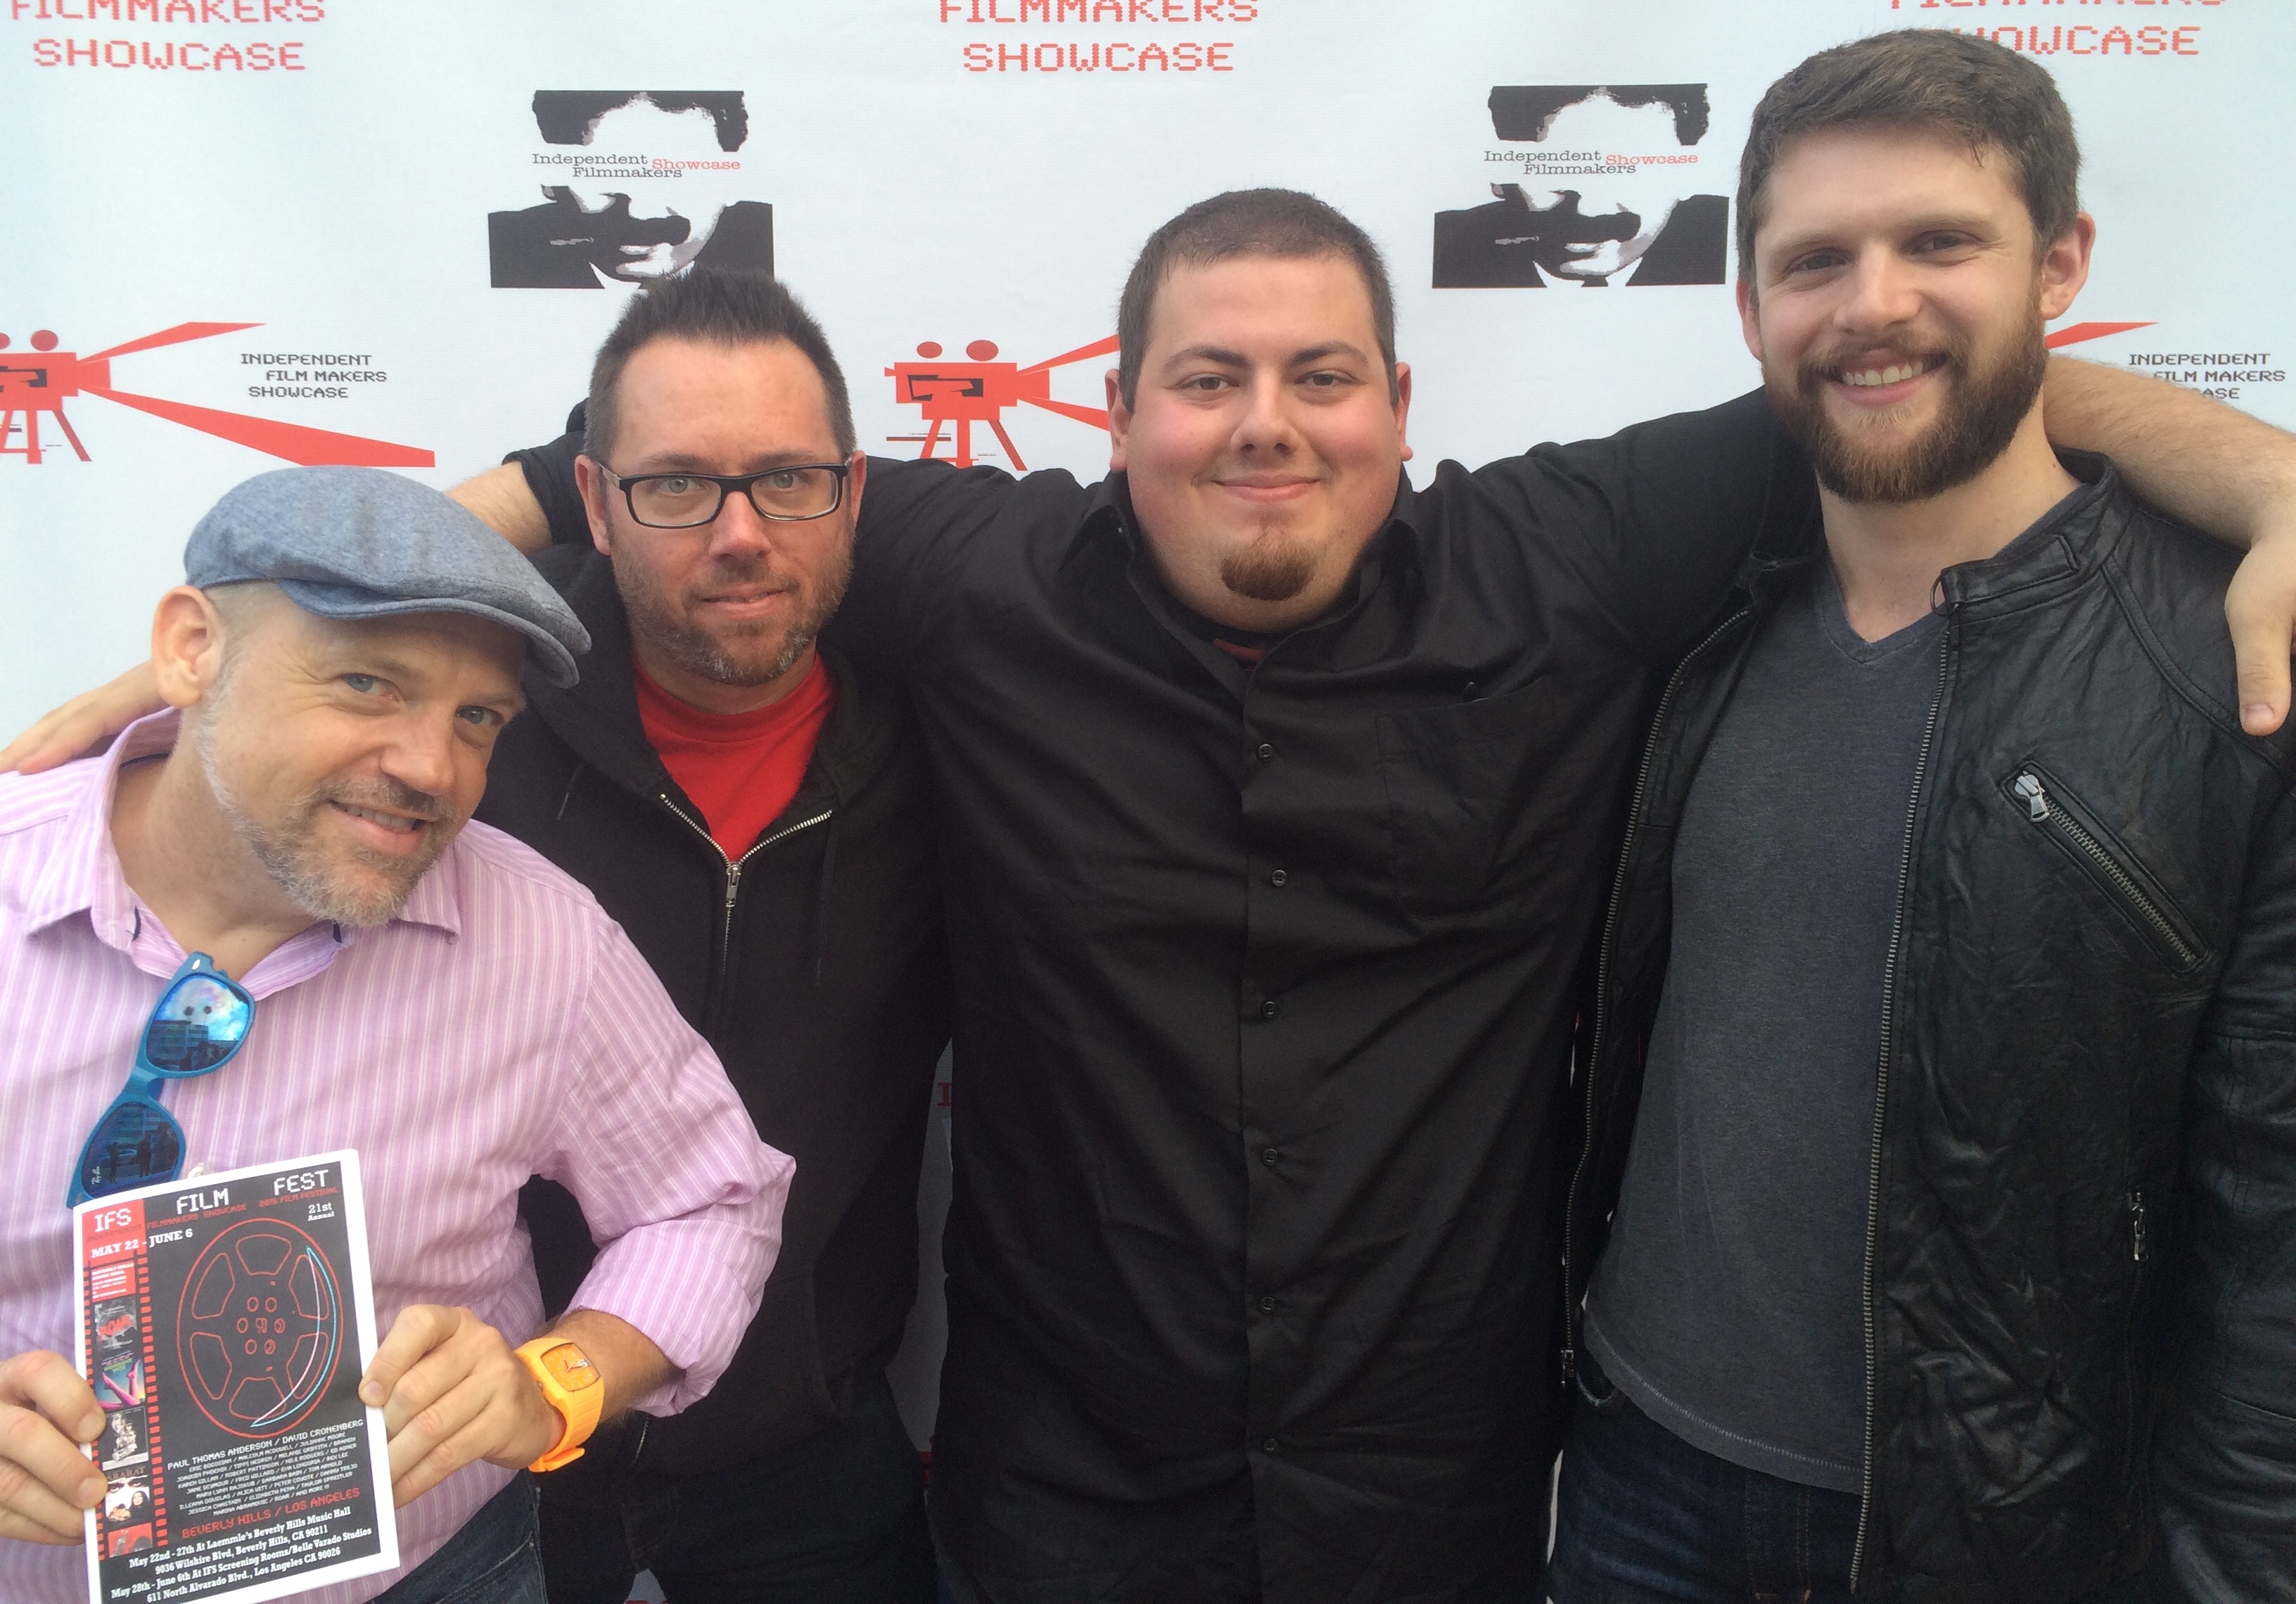 With producer Ryan Stockstad, casting director David Garry and actor Aaron Kelley at the 2015 Independent Filmmakers Showcase Film Festival for Walk-Ons (2014).